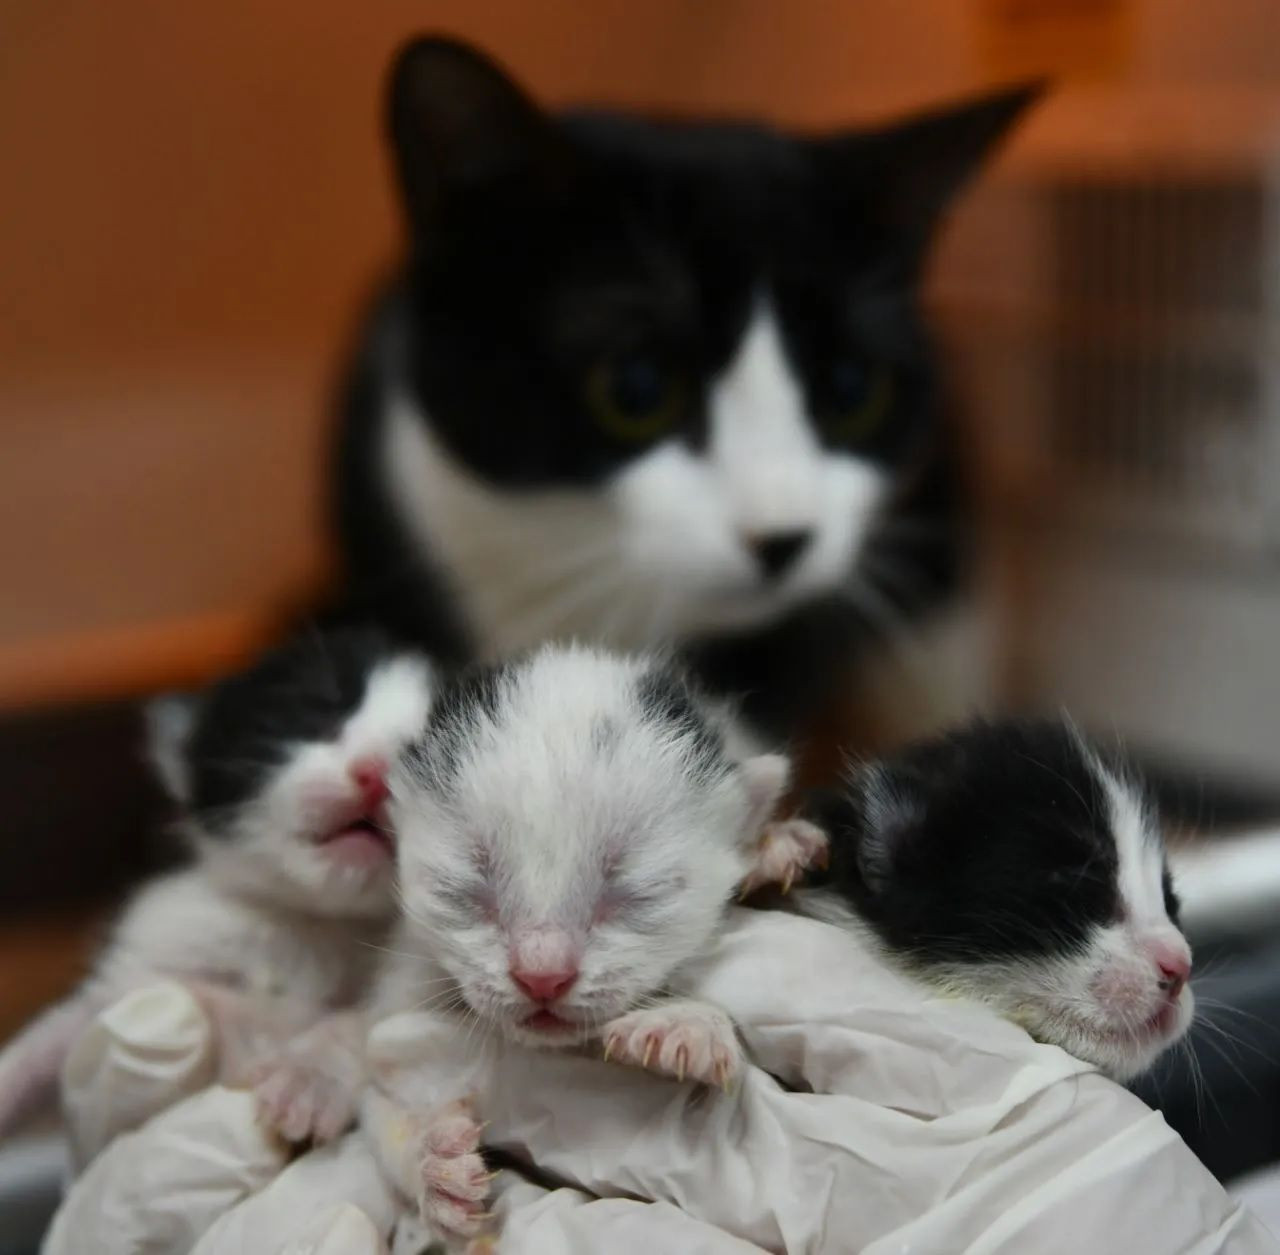 Cat rescued from quake gives birth via cesarean section - Page 2